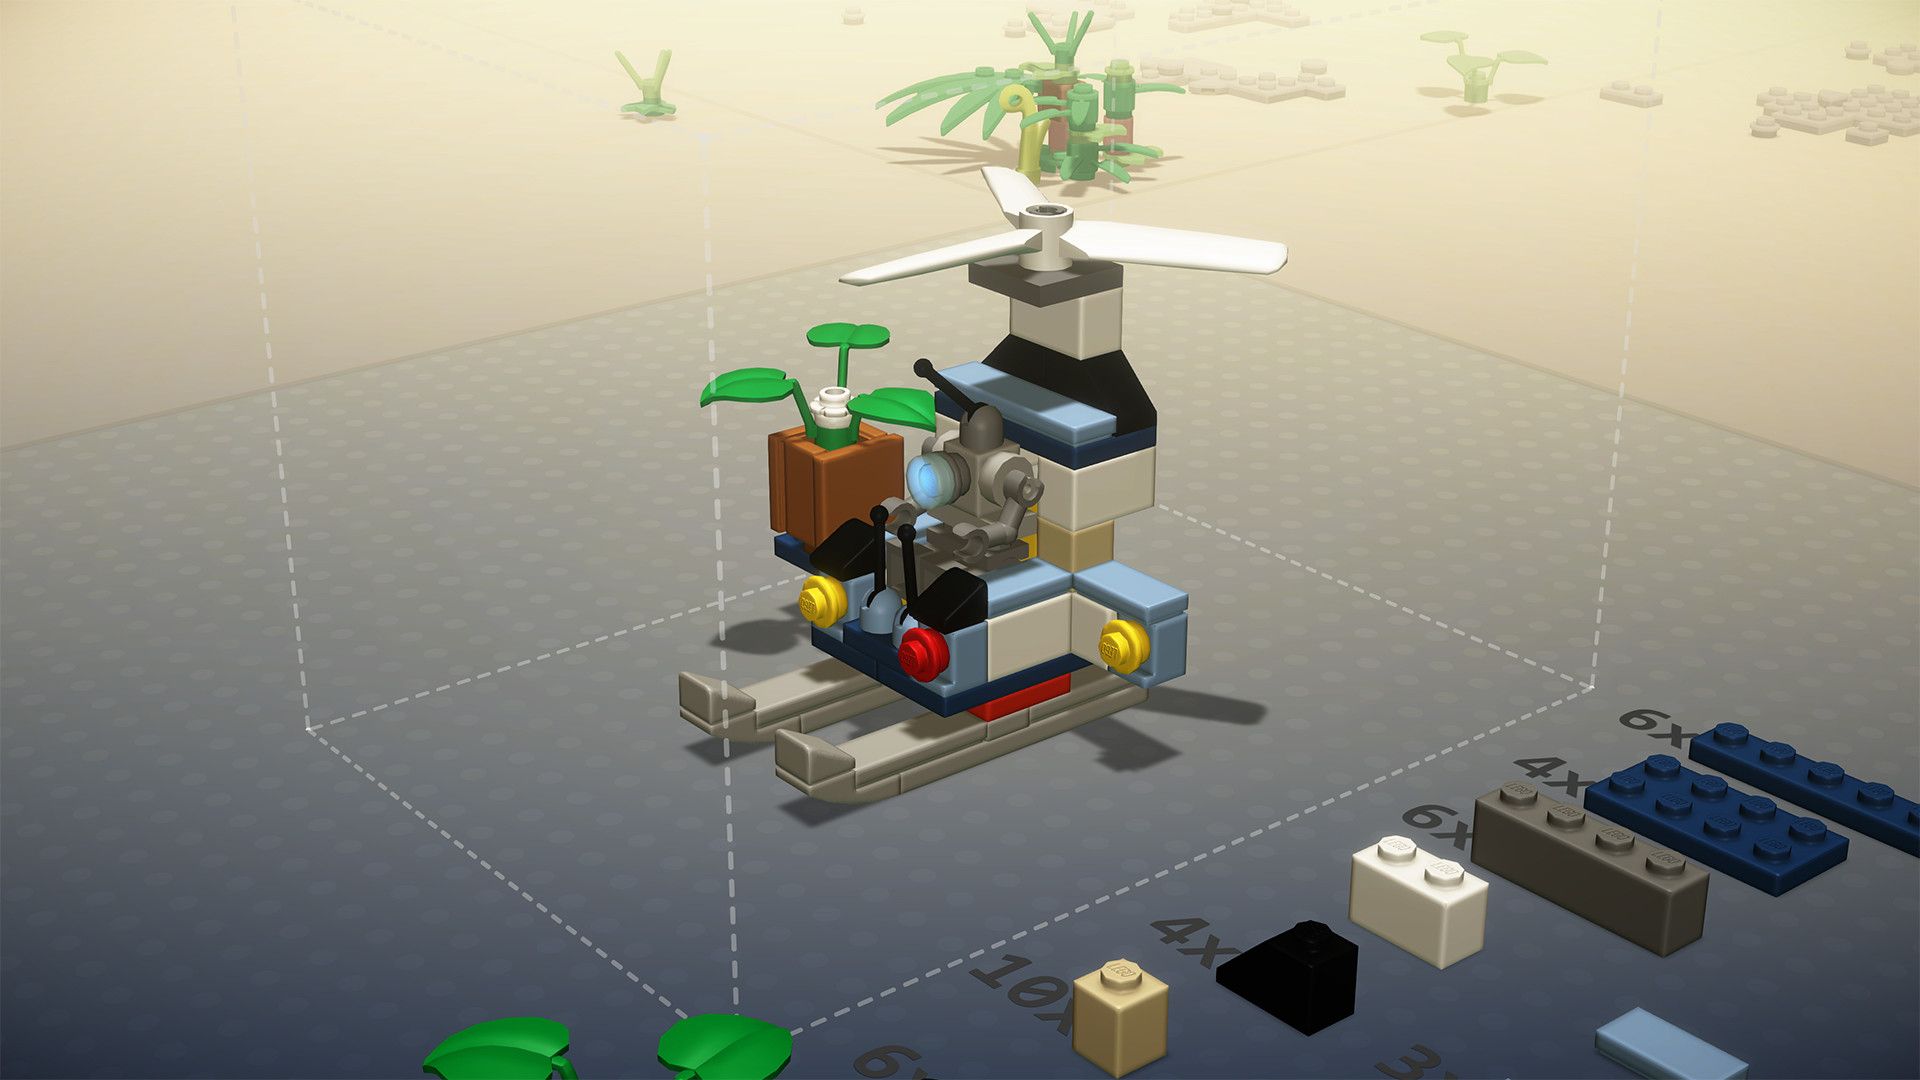 Video game screenshot of a gyrocopter being made out of virtual Lego pieces